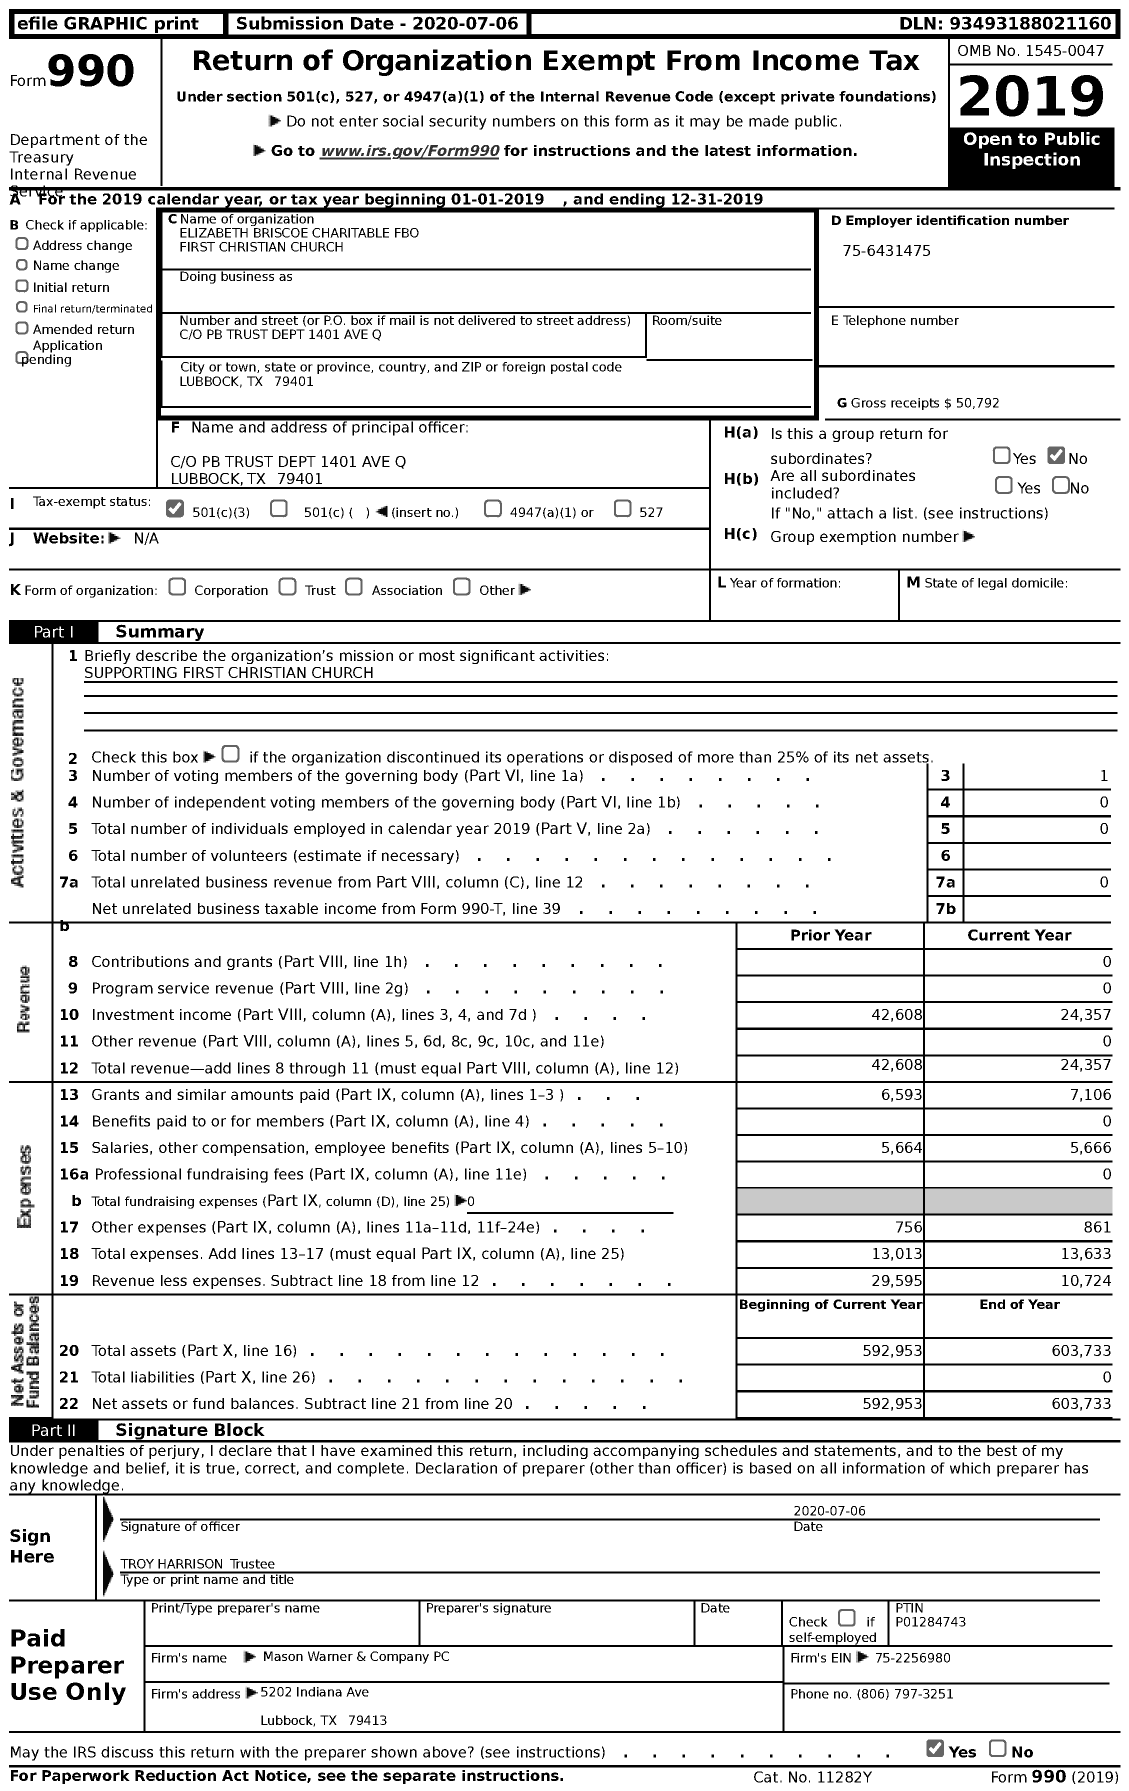 Image of first page of 2019 Form 990 for Elizabeth Briscoe Charitable Fbo First Christian Church